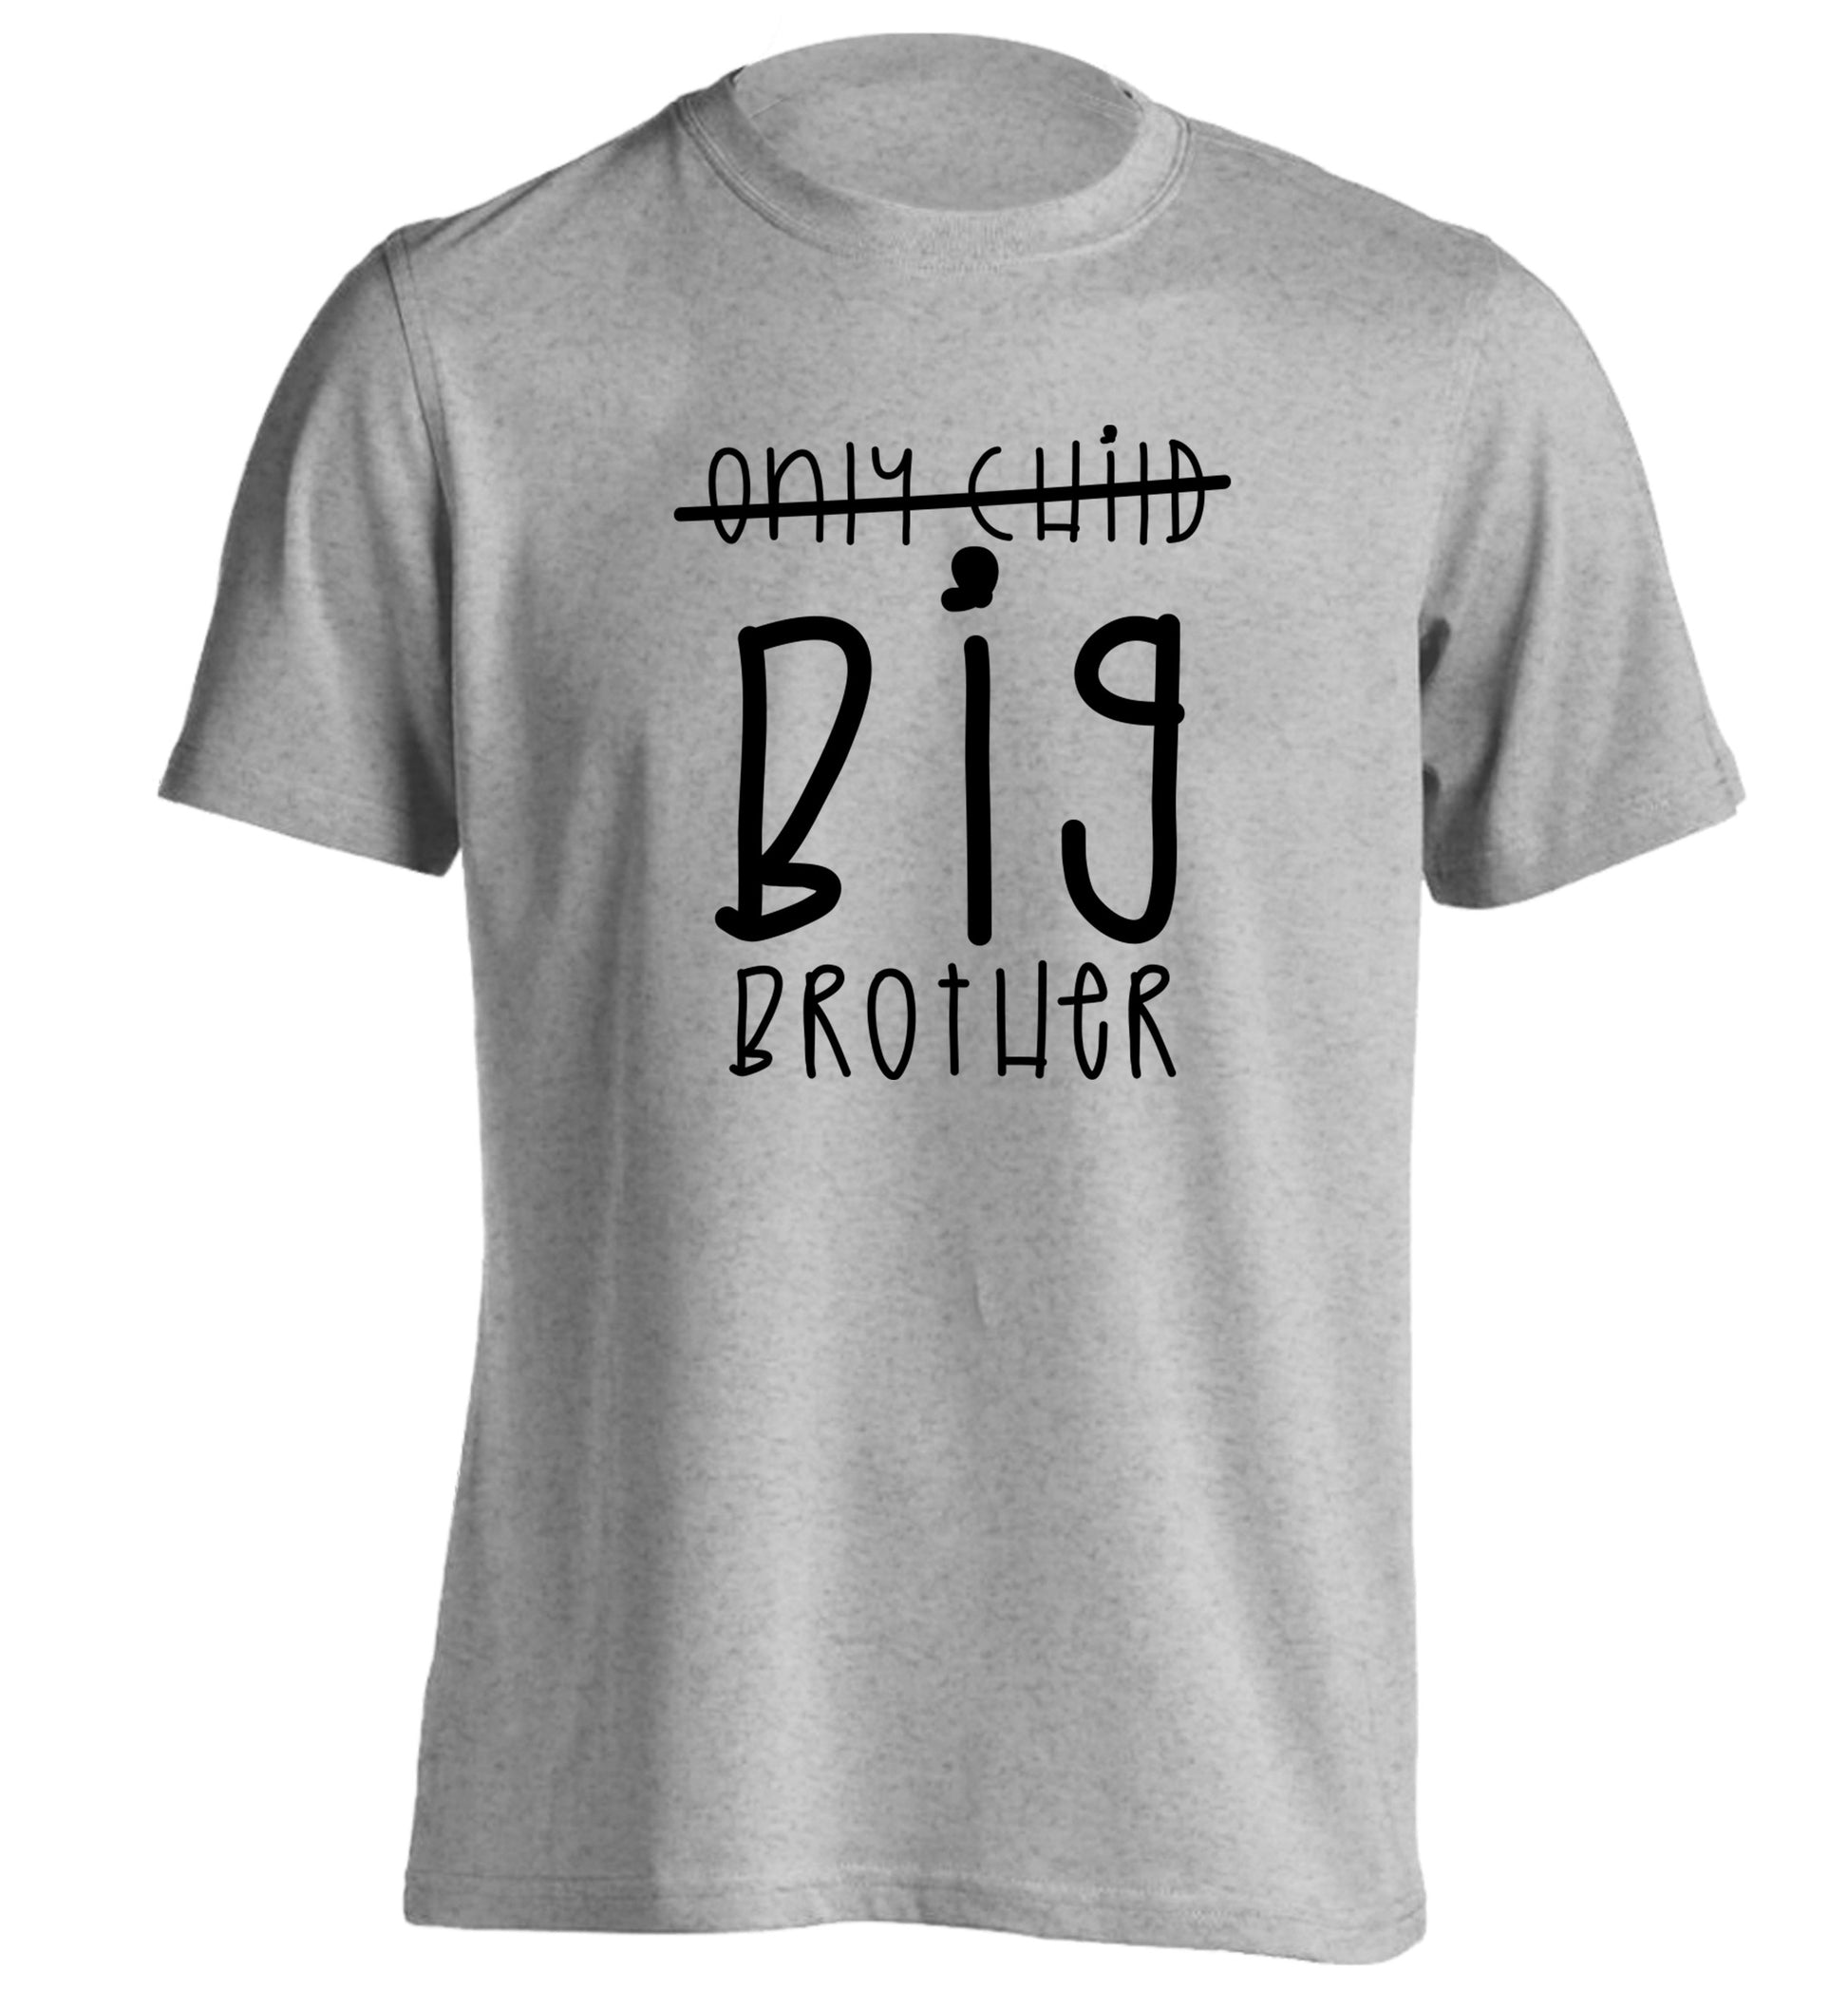 Only child big brother adults unisex grey Tshirt 2XL